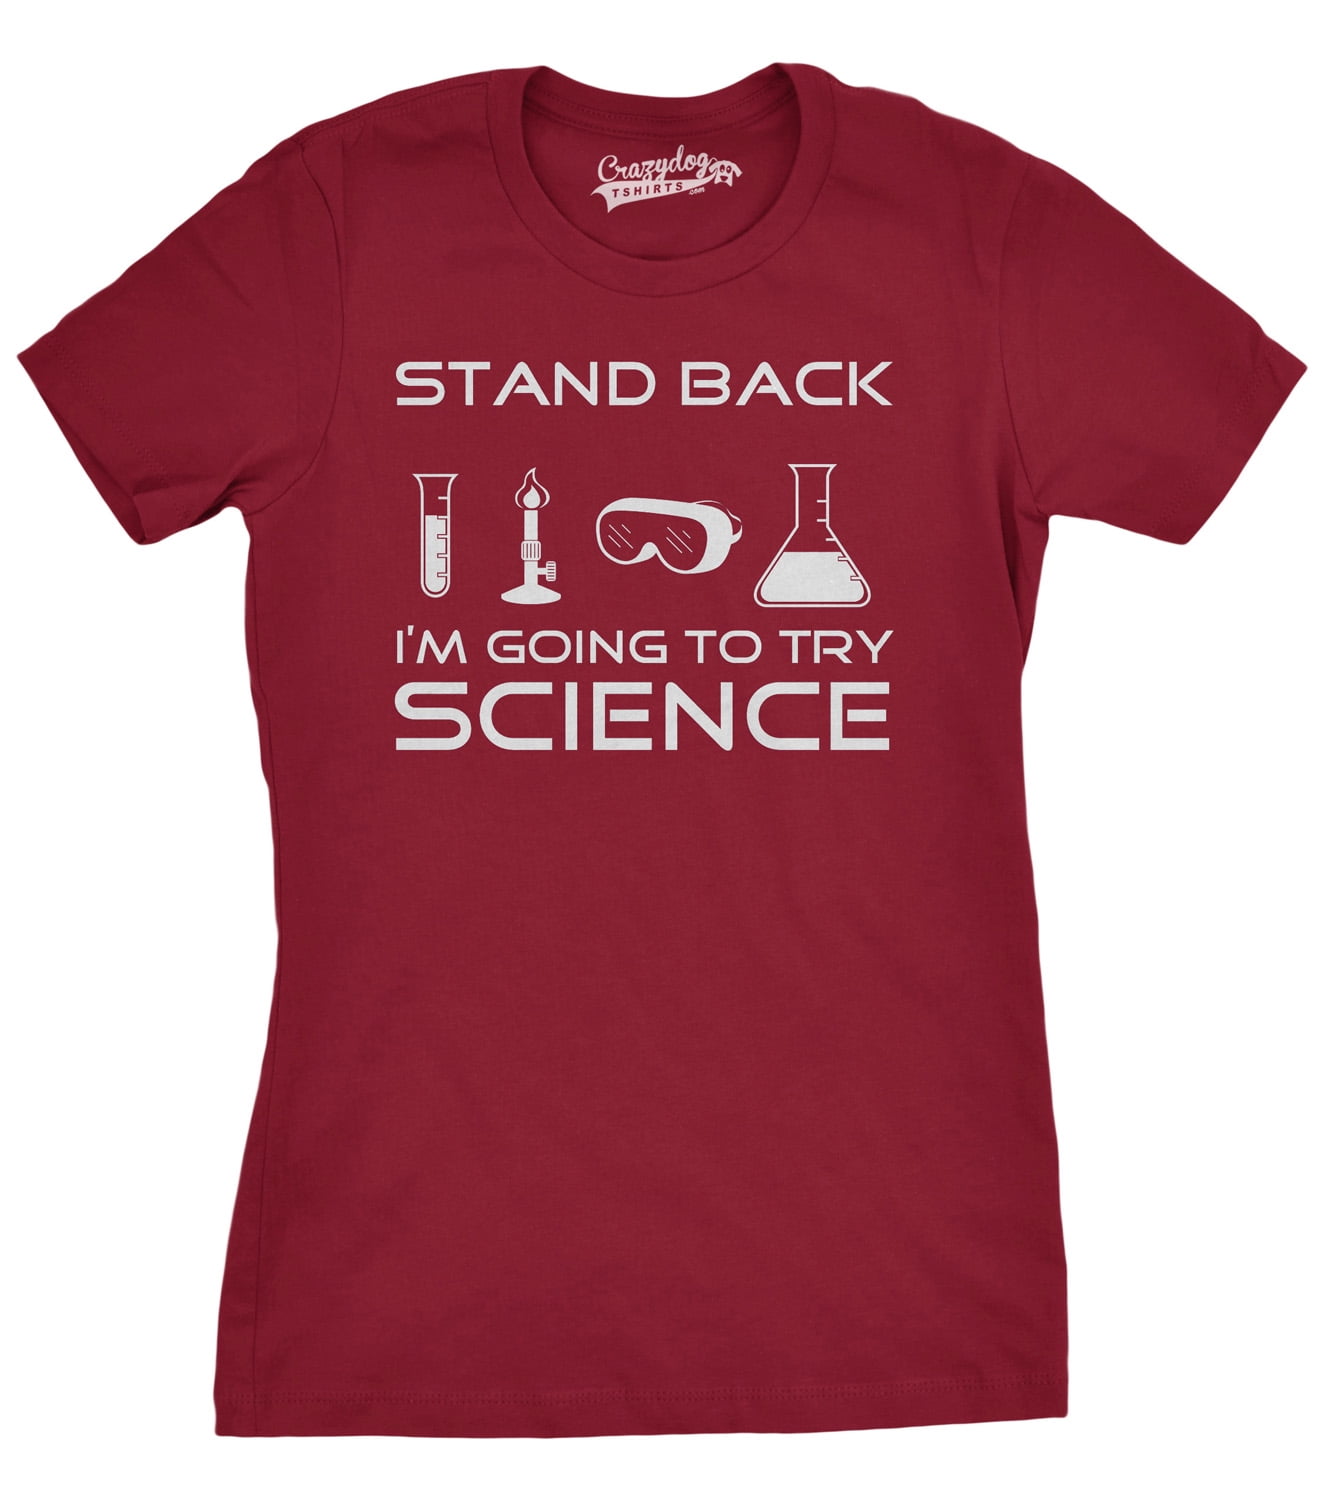 Stand Back I'm Going To Try Science Funny Nerdy Tee Geek Smart Hoodie Sweatshirt